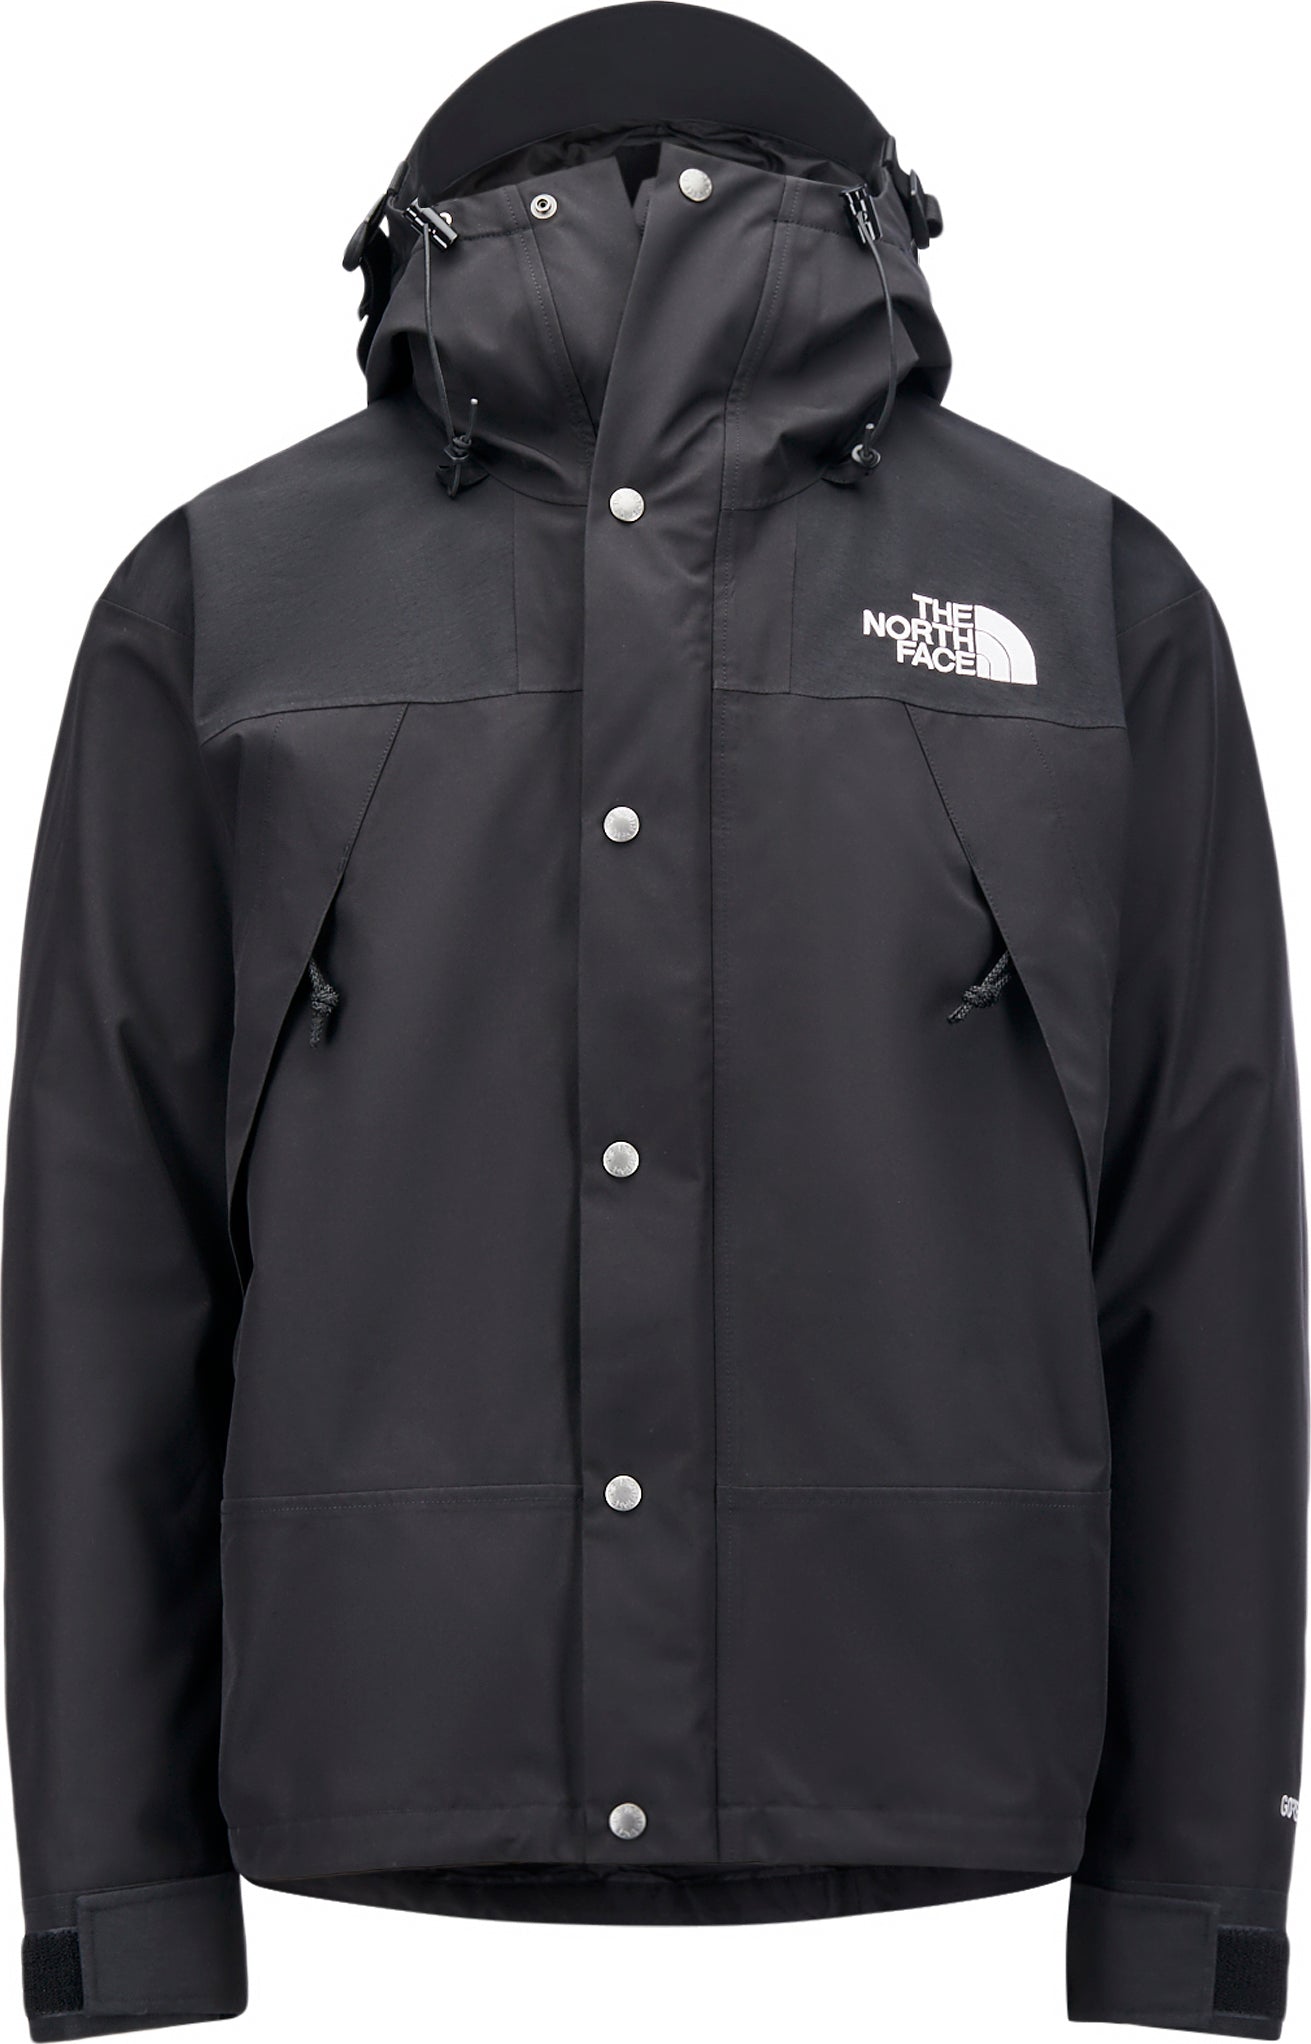 The North Face 1990 Mountain Jacket GORE-TEX - Men's